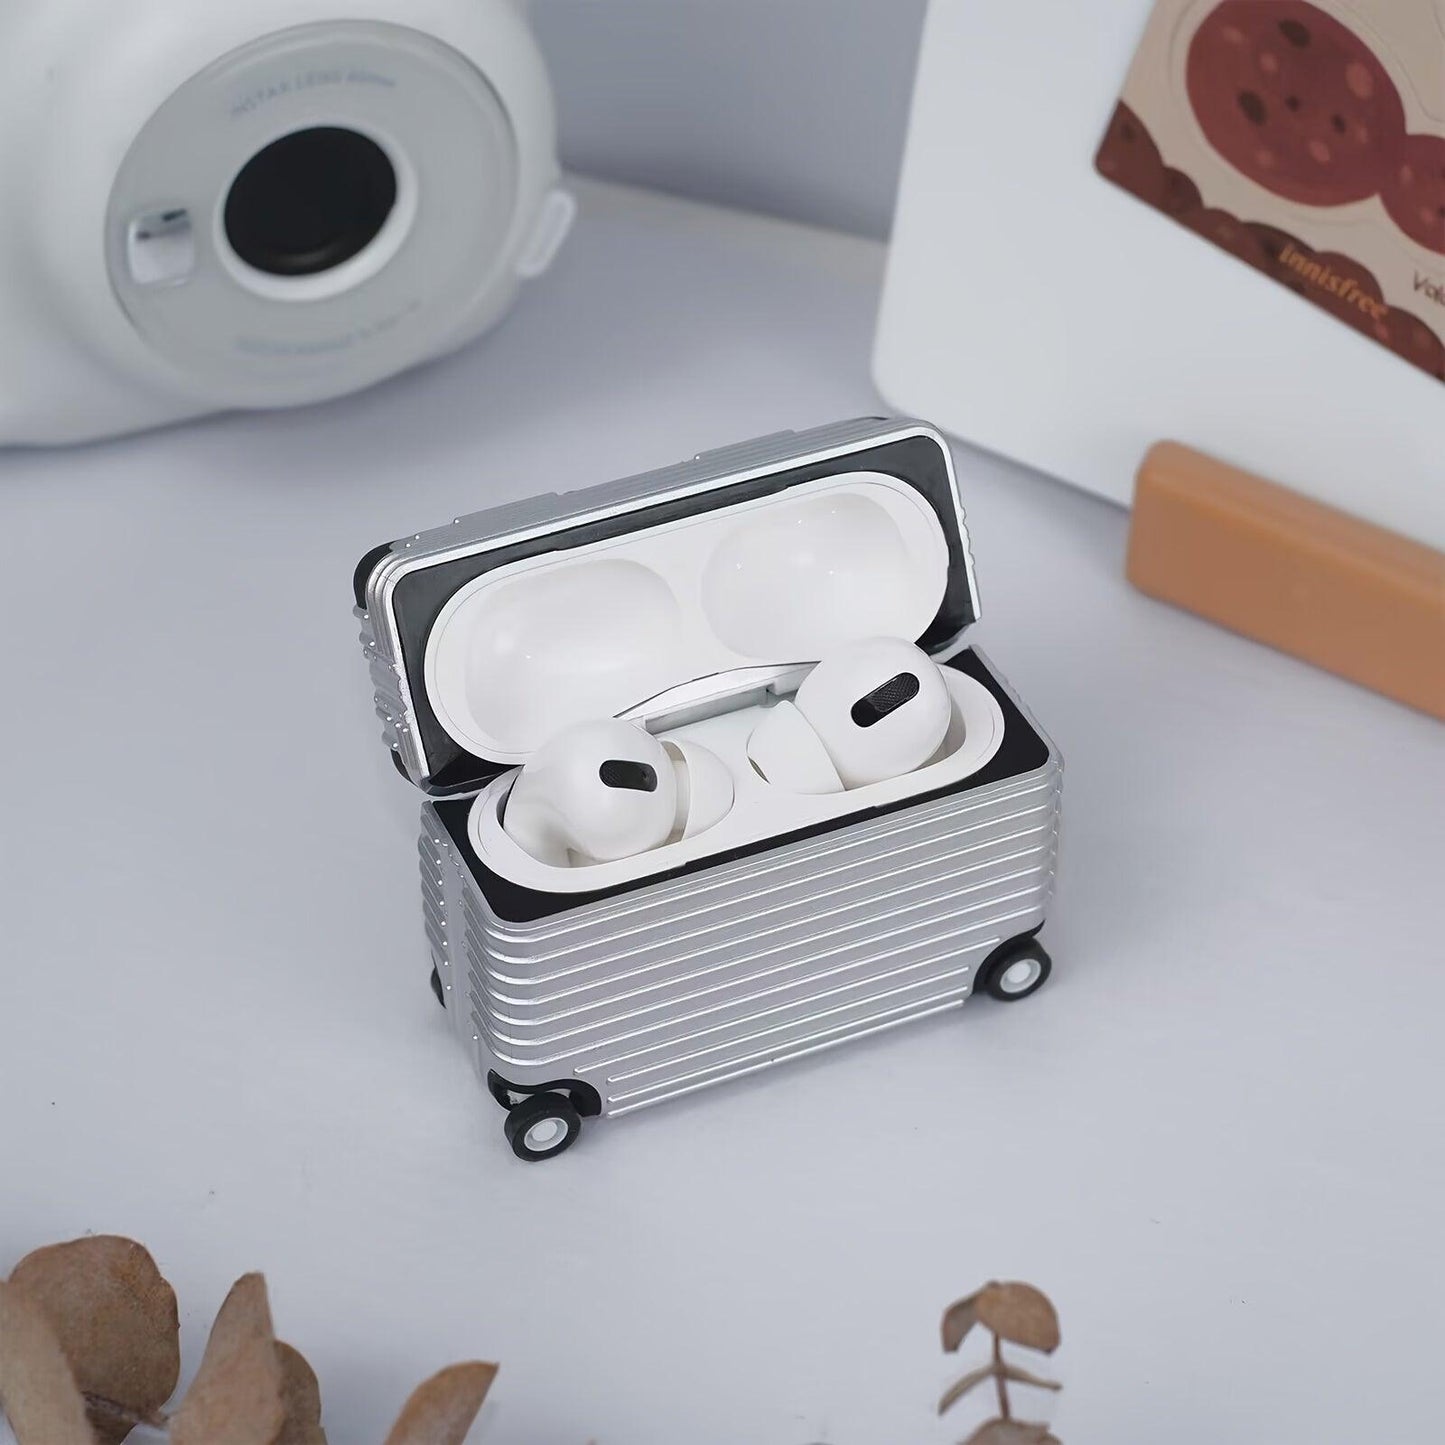 New Luxury Original Luggage Design Cover For Airpods Pro Case Wireless Headset Accessory - J & B's Accessories